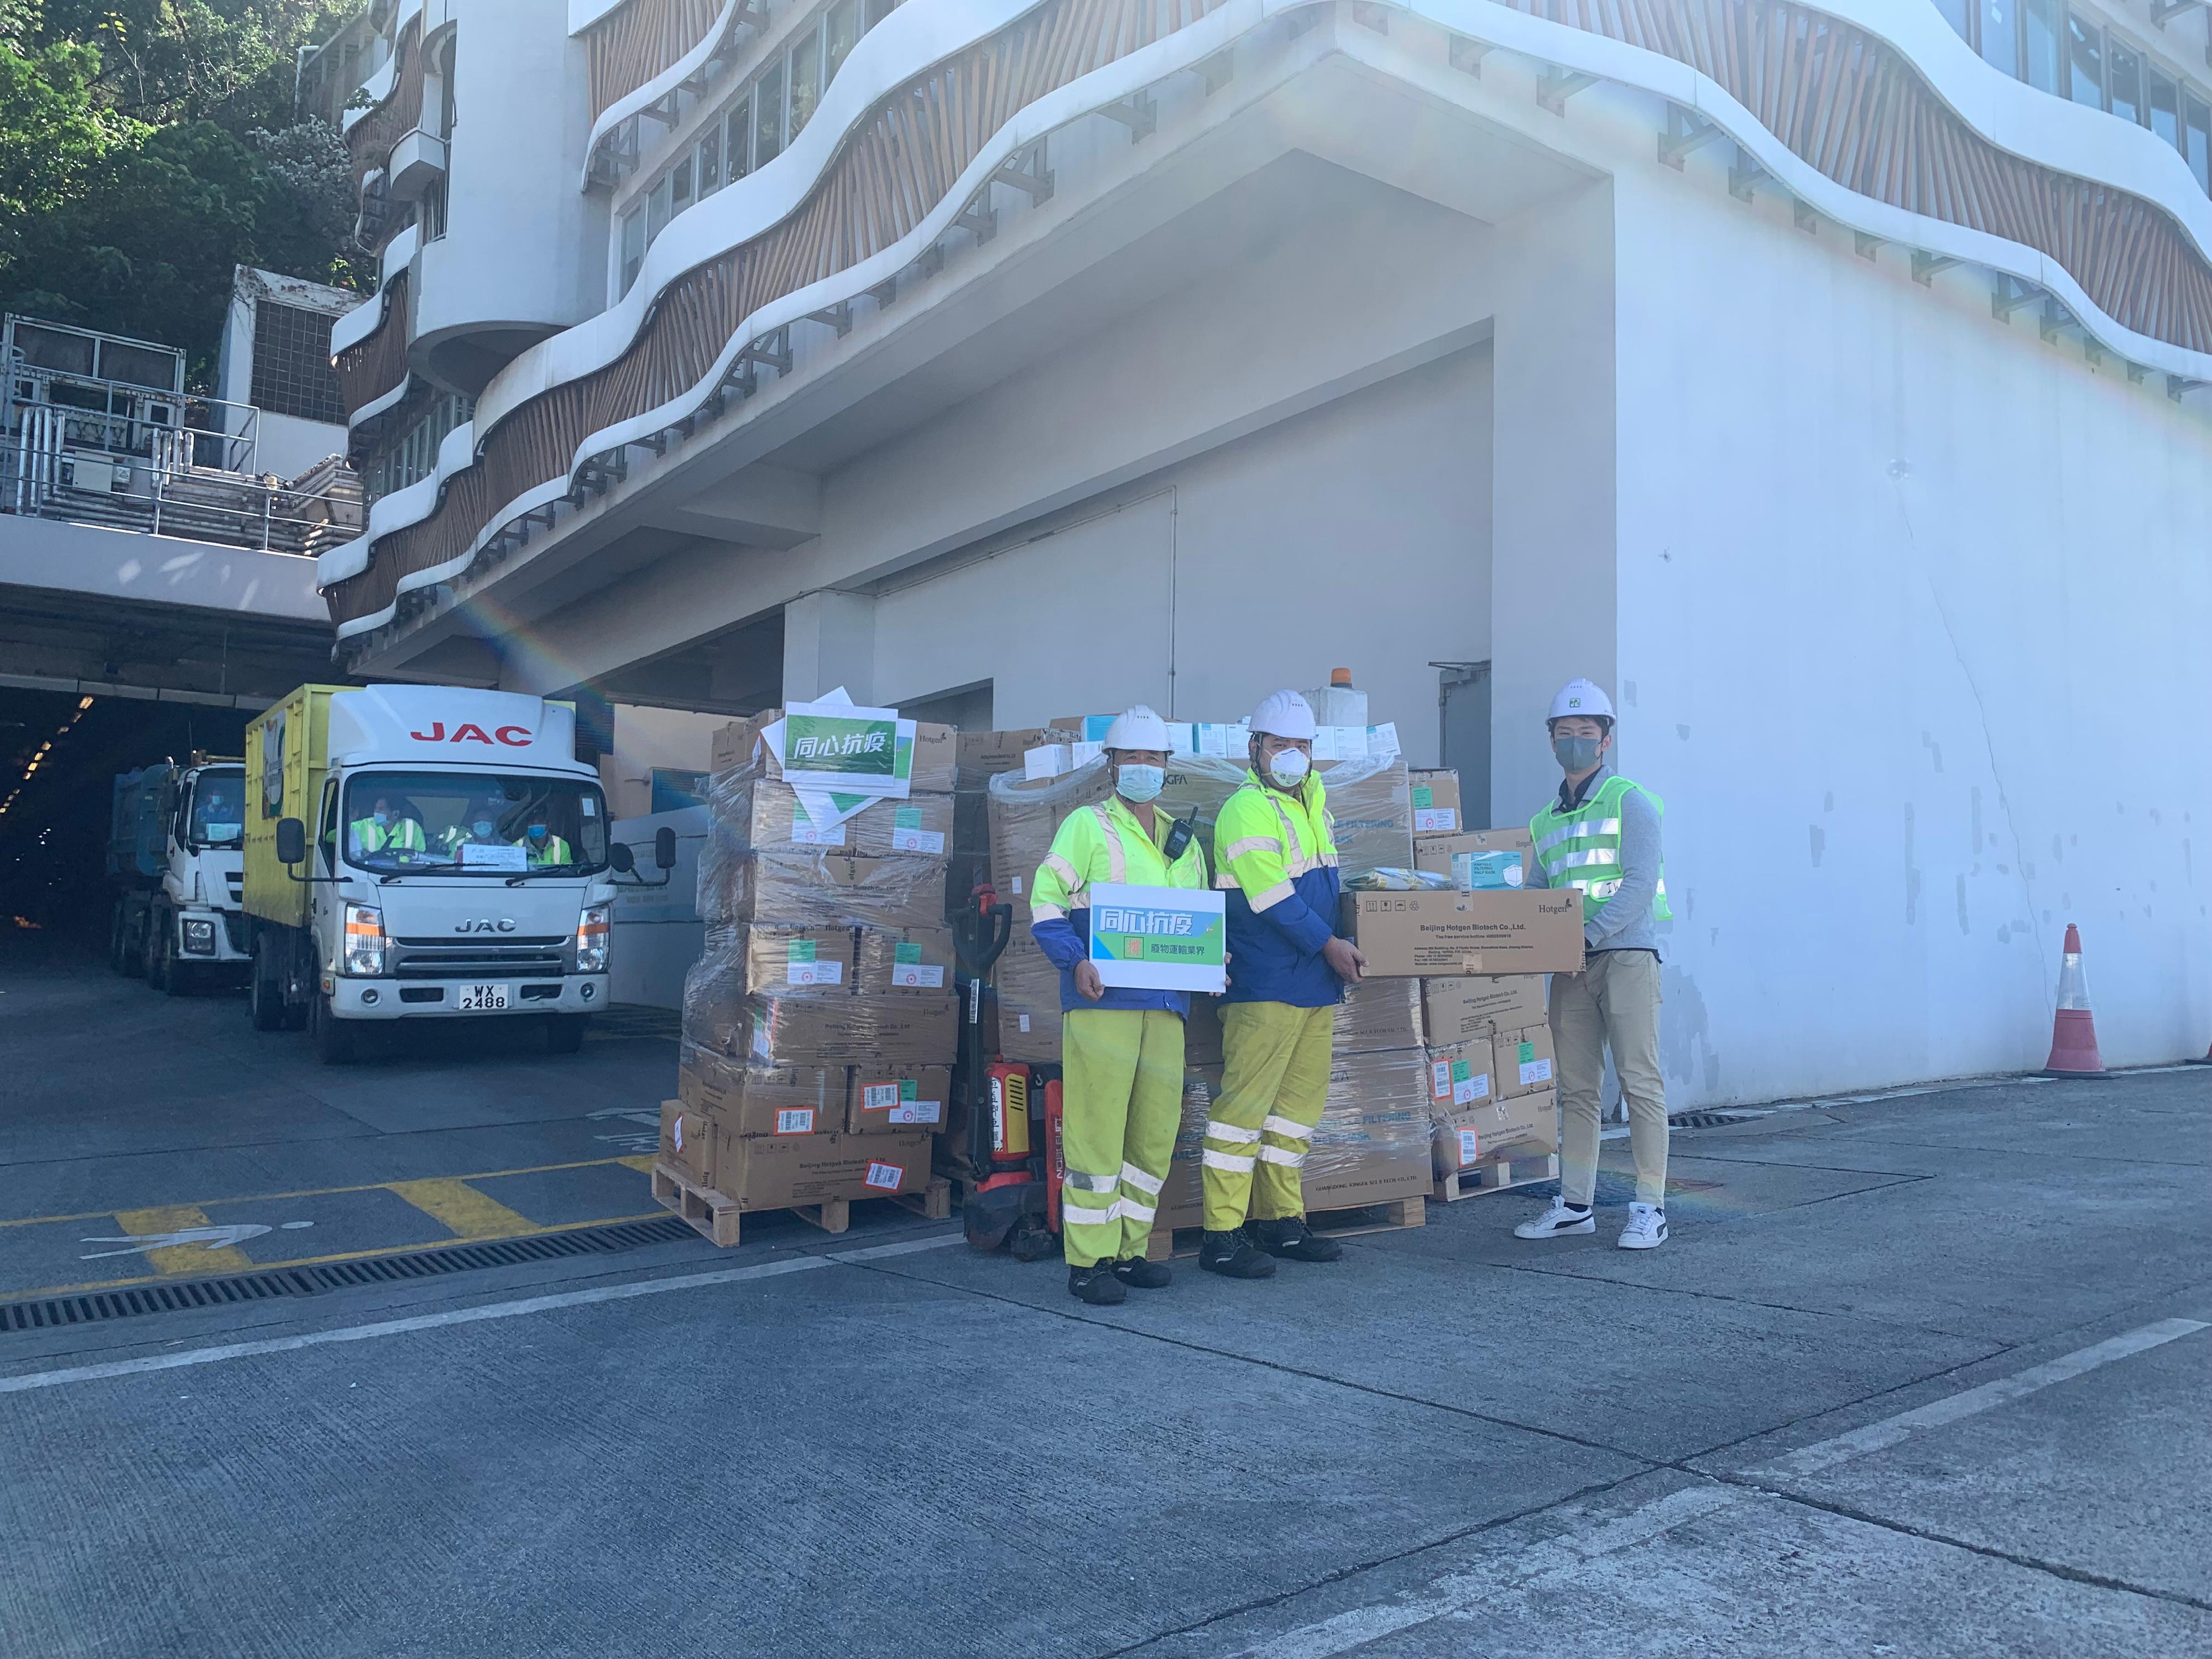 The Environmental Protection Department (EPD) has distributed KN95 masks and rapid antigen test (RAT) kits to contractor staff of landfills and refuse transfer stations to assist them in fighting against the epidemic. Picture shows an EPD staff member distributing masks and RAT kits to the representatives of refuse transfer station contractors.